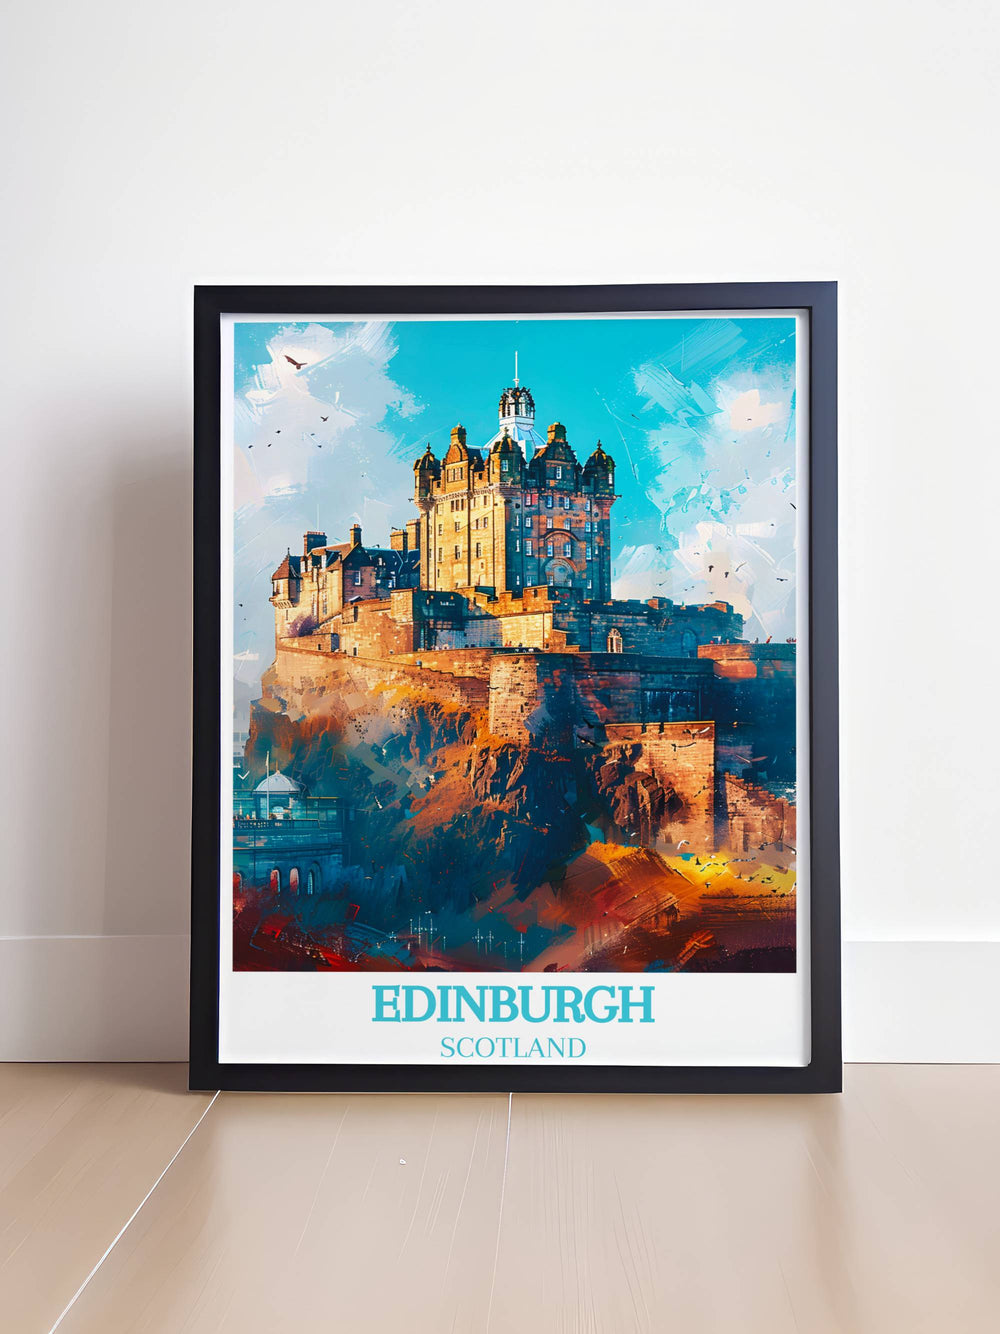 Transform your space with this Scotland photography wall art featuring the majestic Edinburgh Castle, an ideal decor piece for lovers of Scottish landscapes.